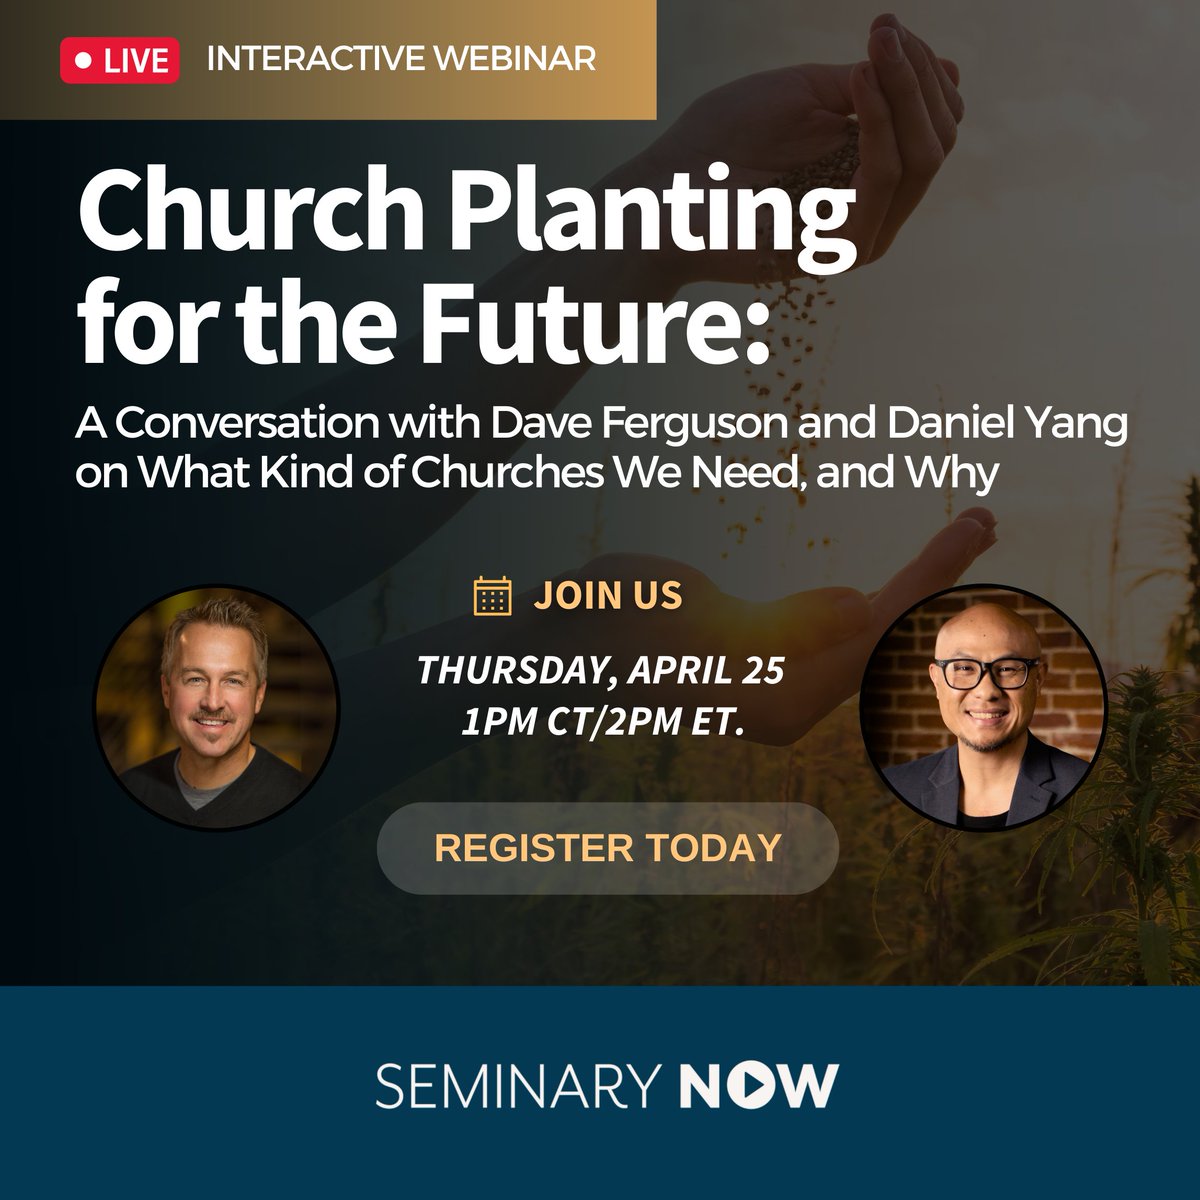 Ready for the future of the church? Join ministry leaders Dave Ferguson & @koobxwm, in a free discussion on what kind of churches we need! April 25, 1 PM CT. Register today: seminarynow.com/pages/church-p… #churchplanting #ministry #innovation